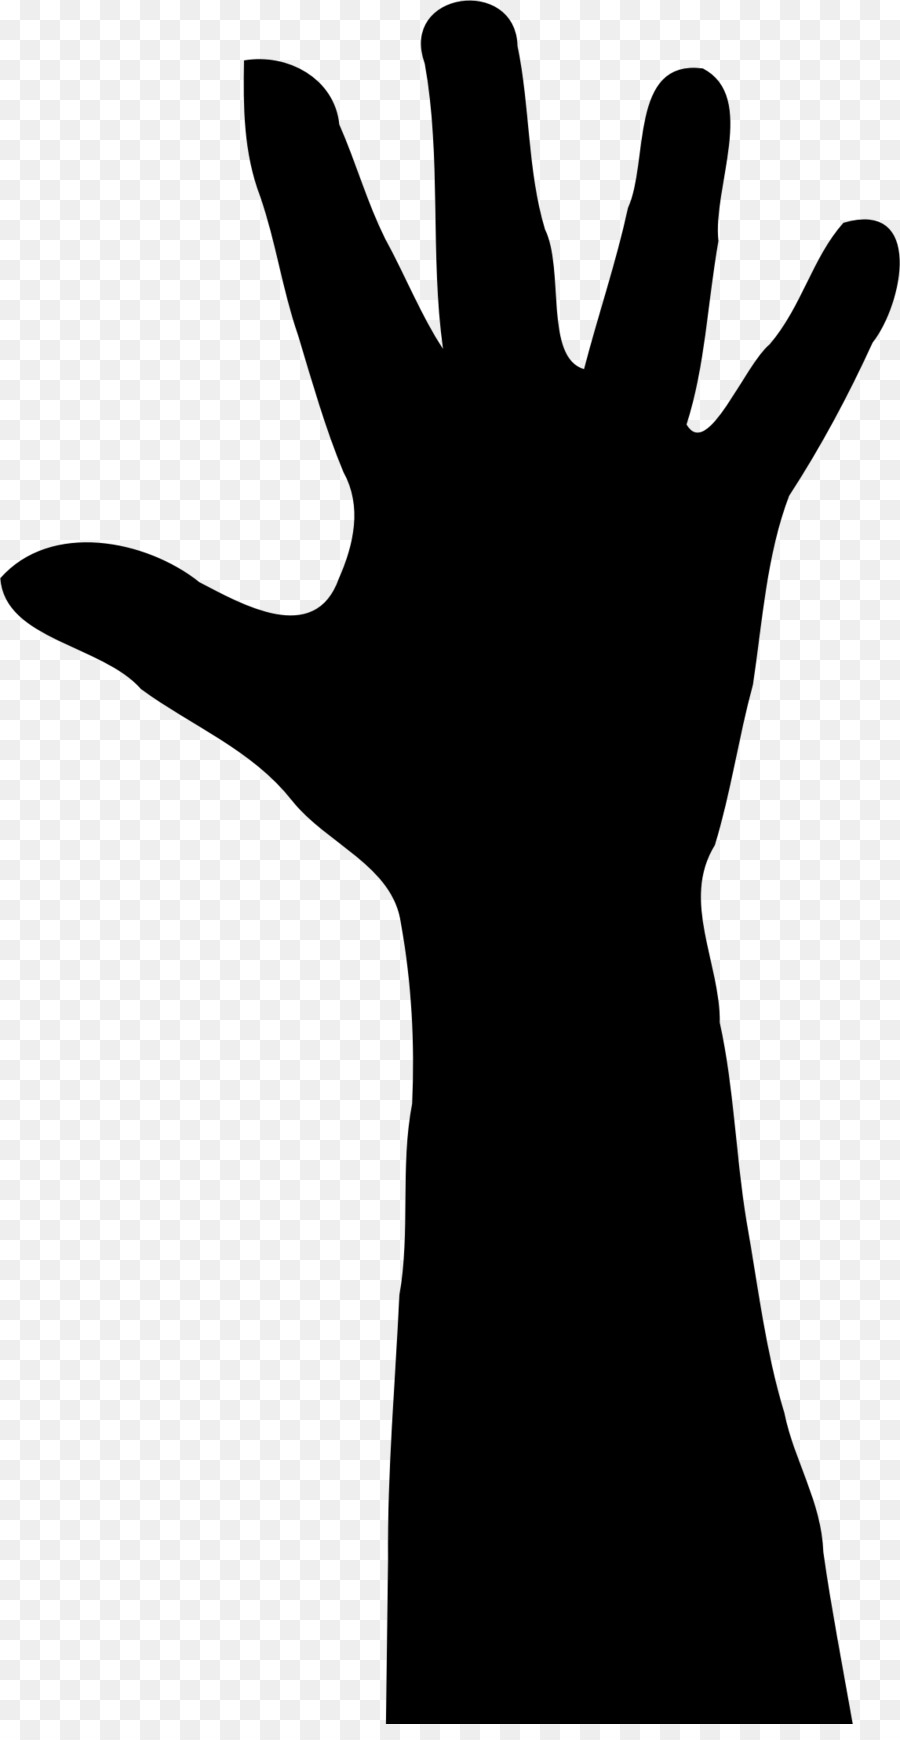 Silhouette Hand Clip art - arm png download - 1147*2197 - Free Transparent Silhouette png Download.